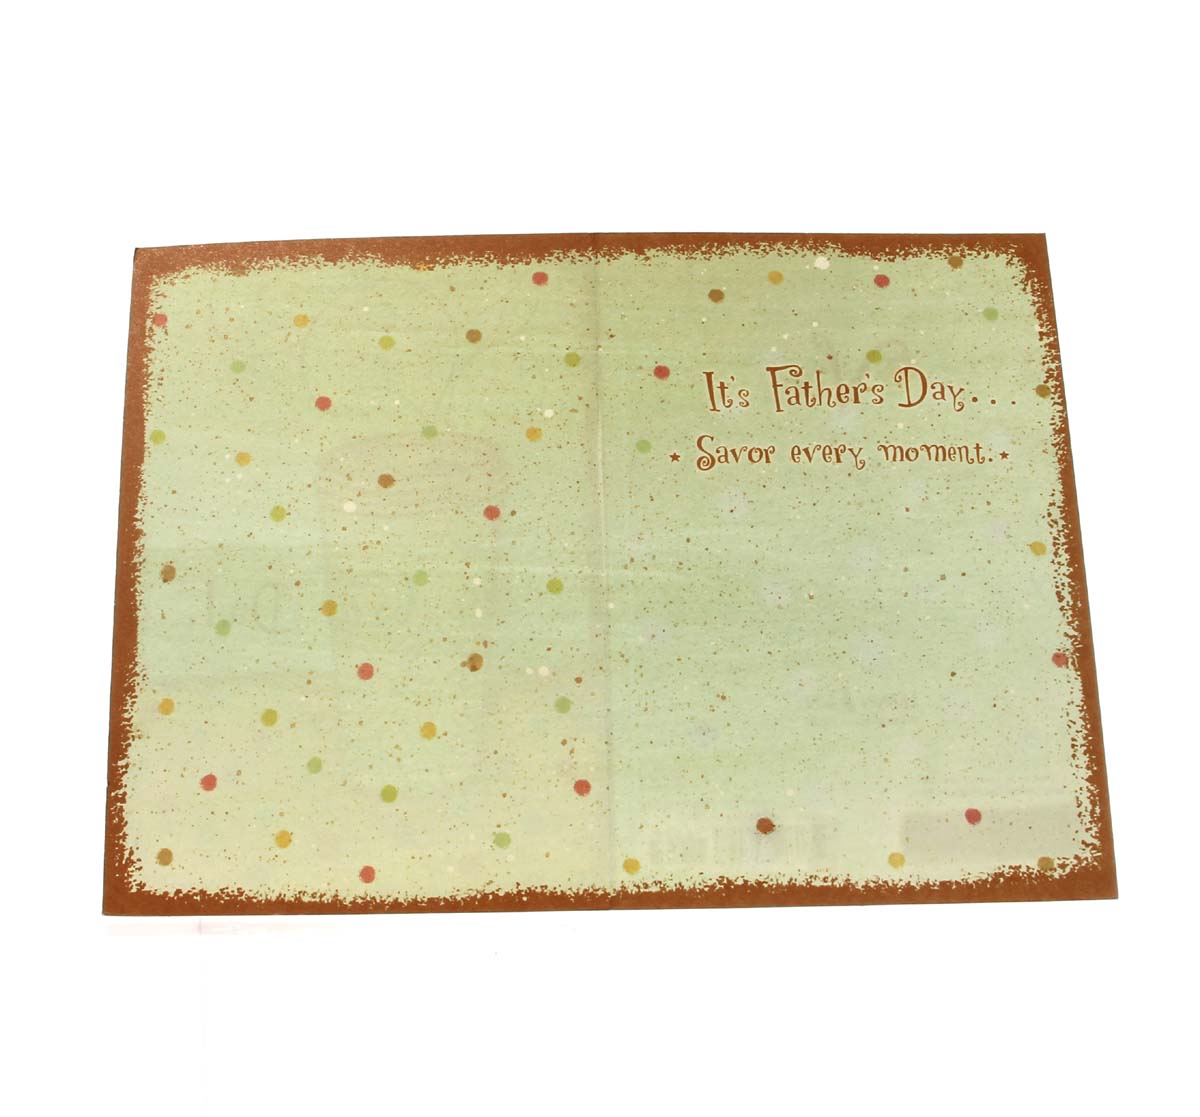 Father's Day Card-"Dad..." (image of a cup of coffee)